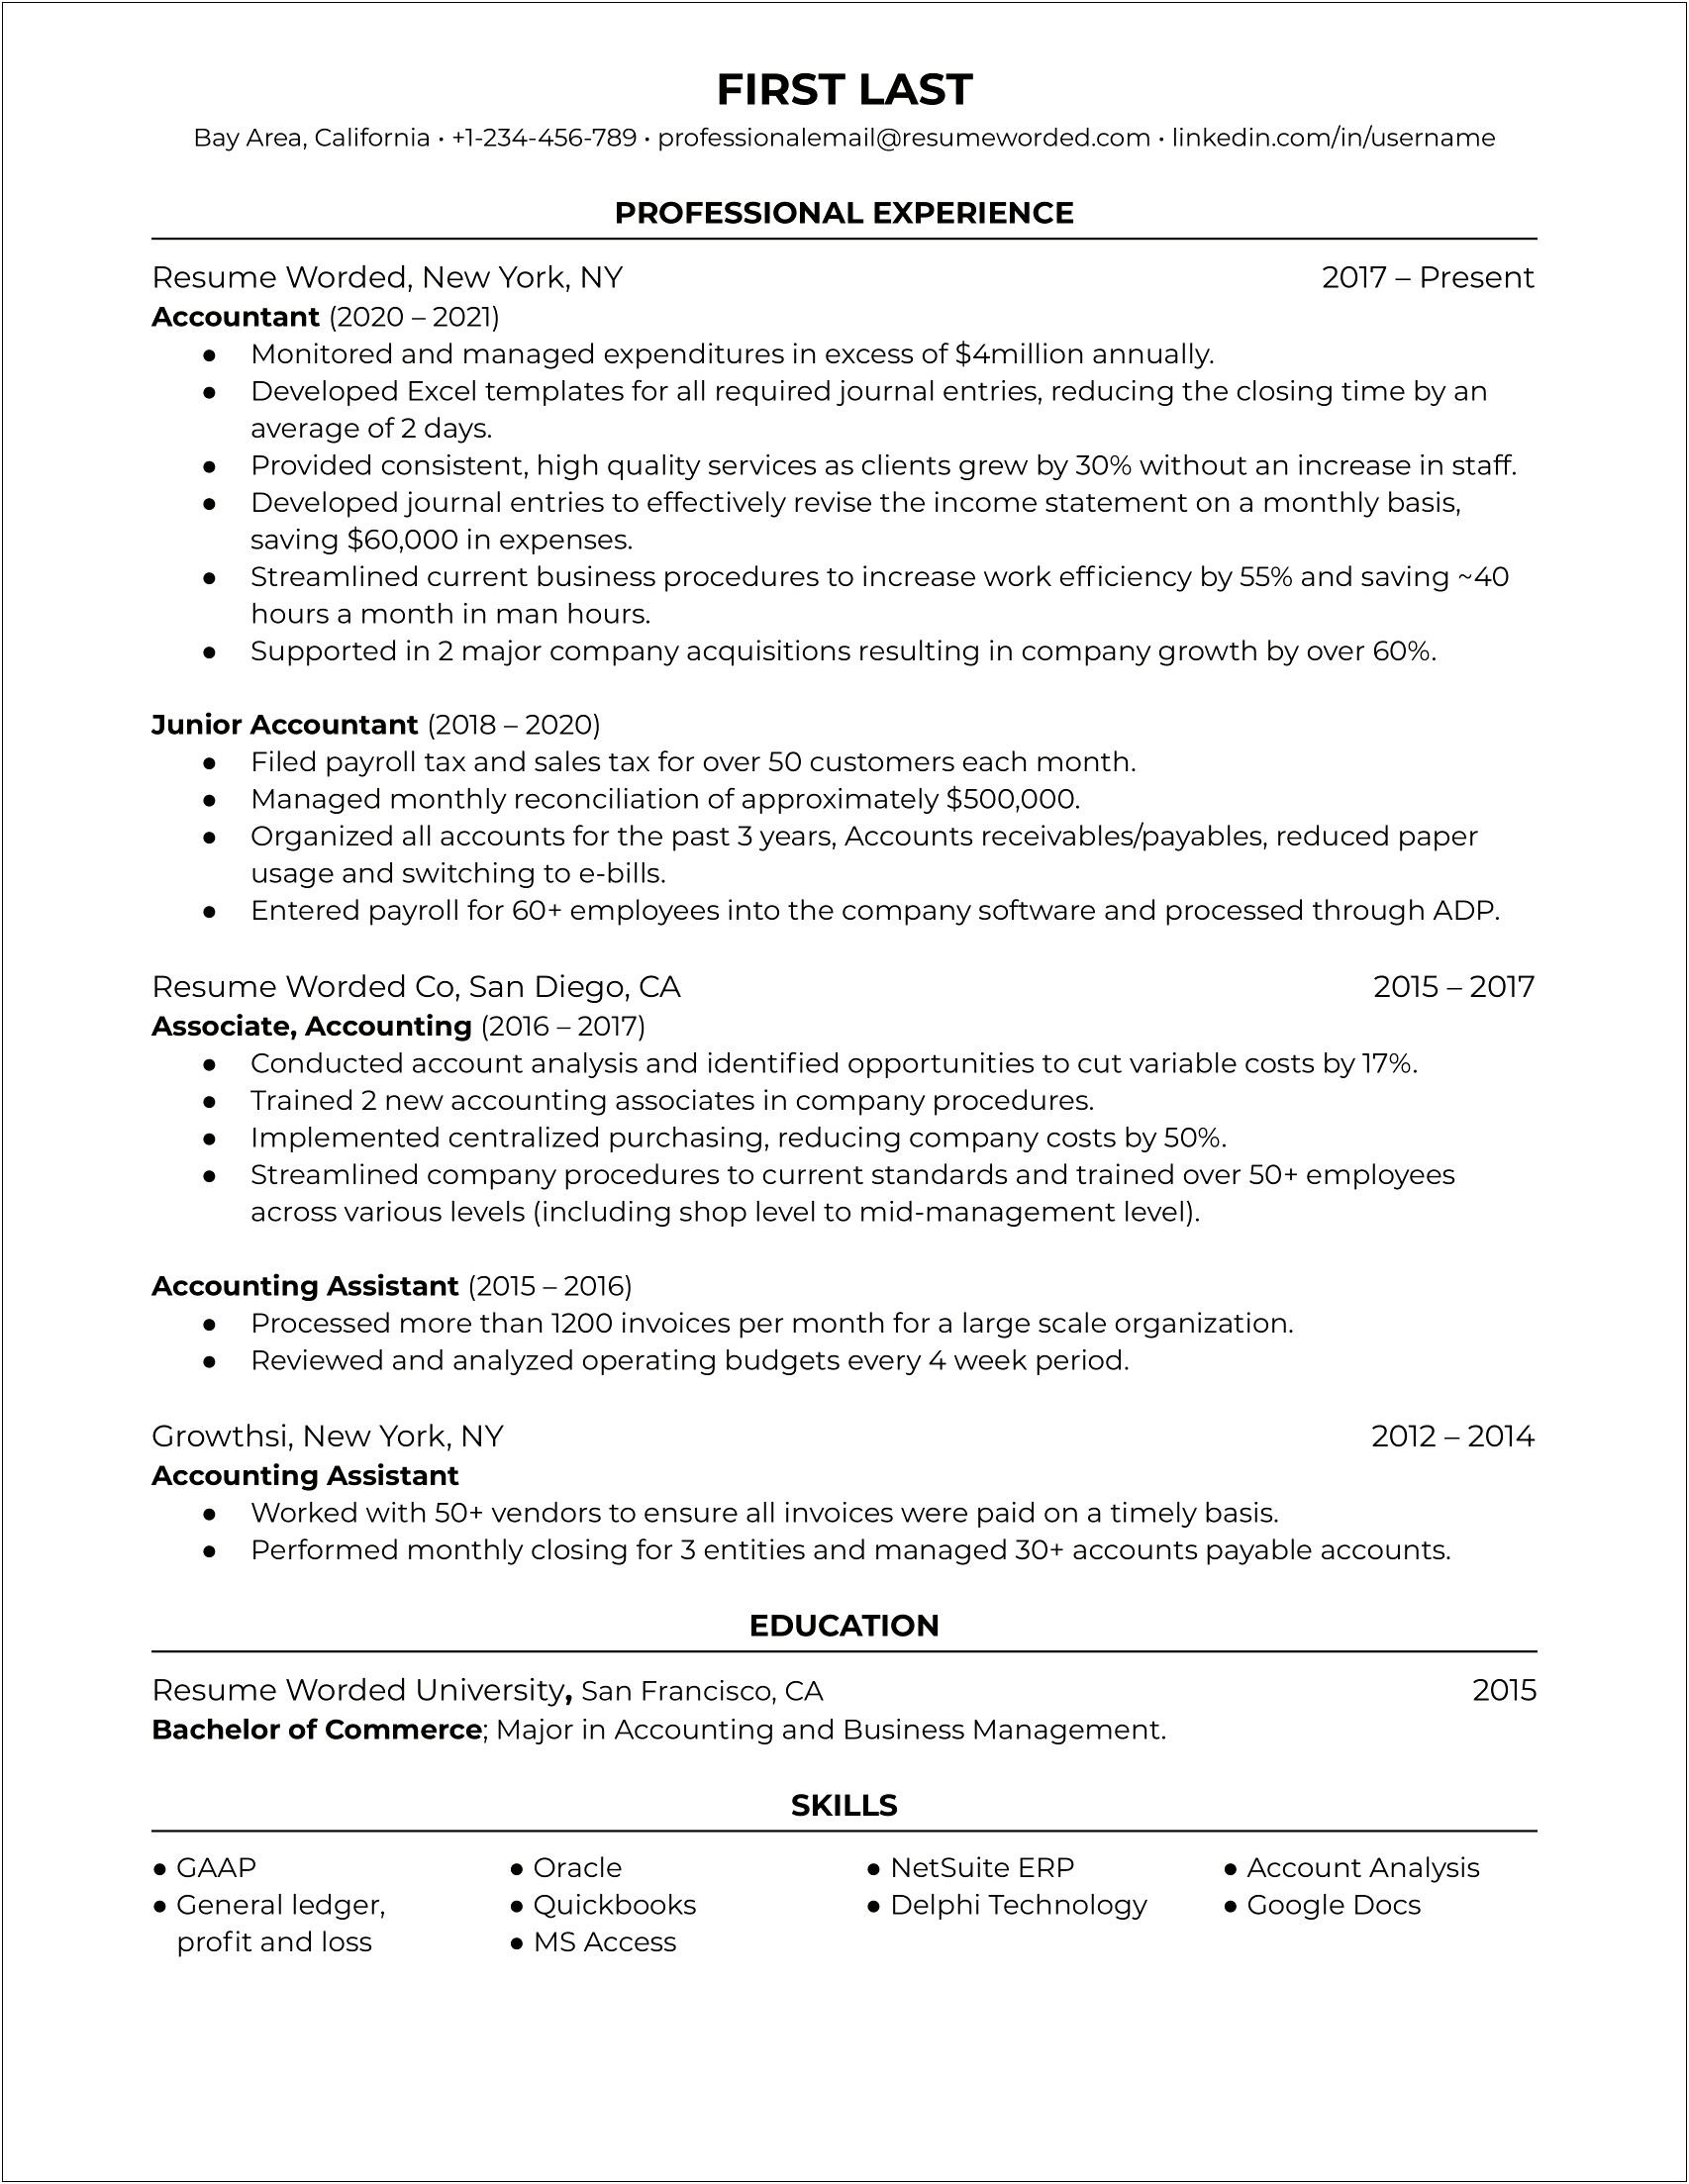 Resume For International Tax Manager